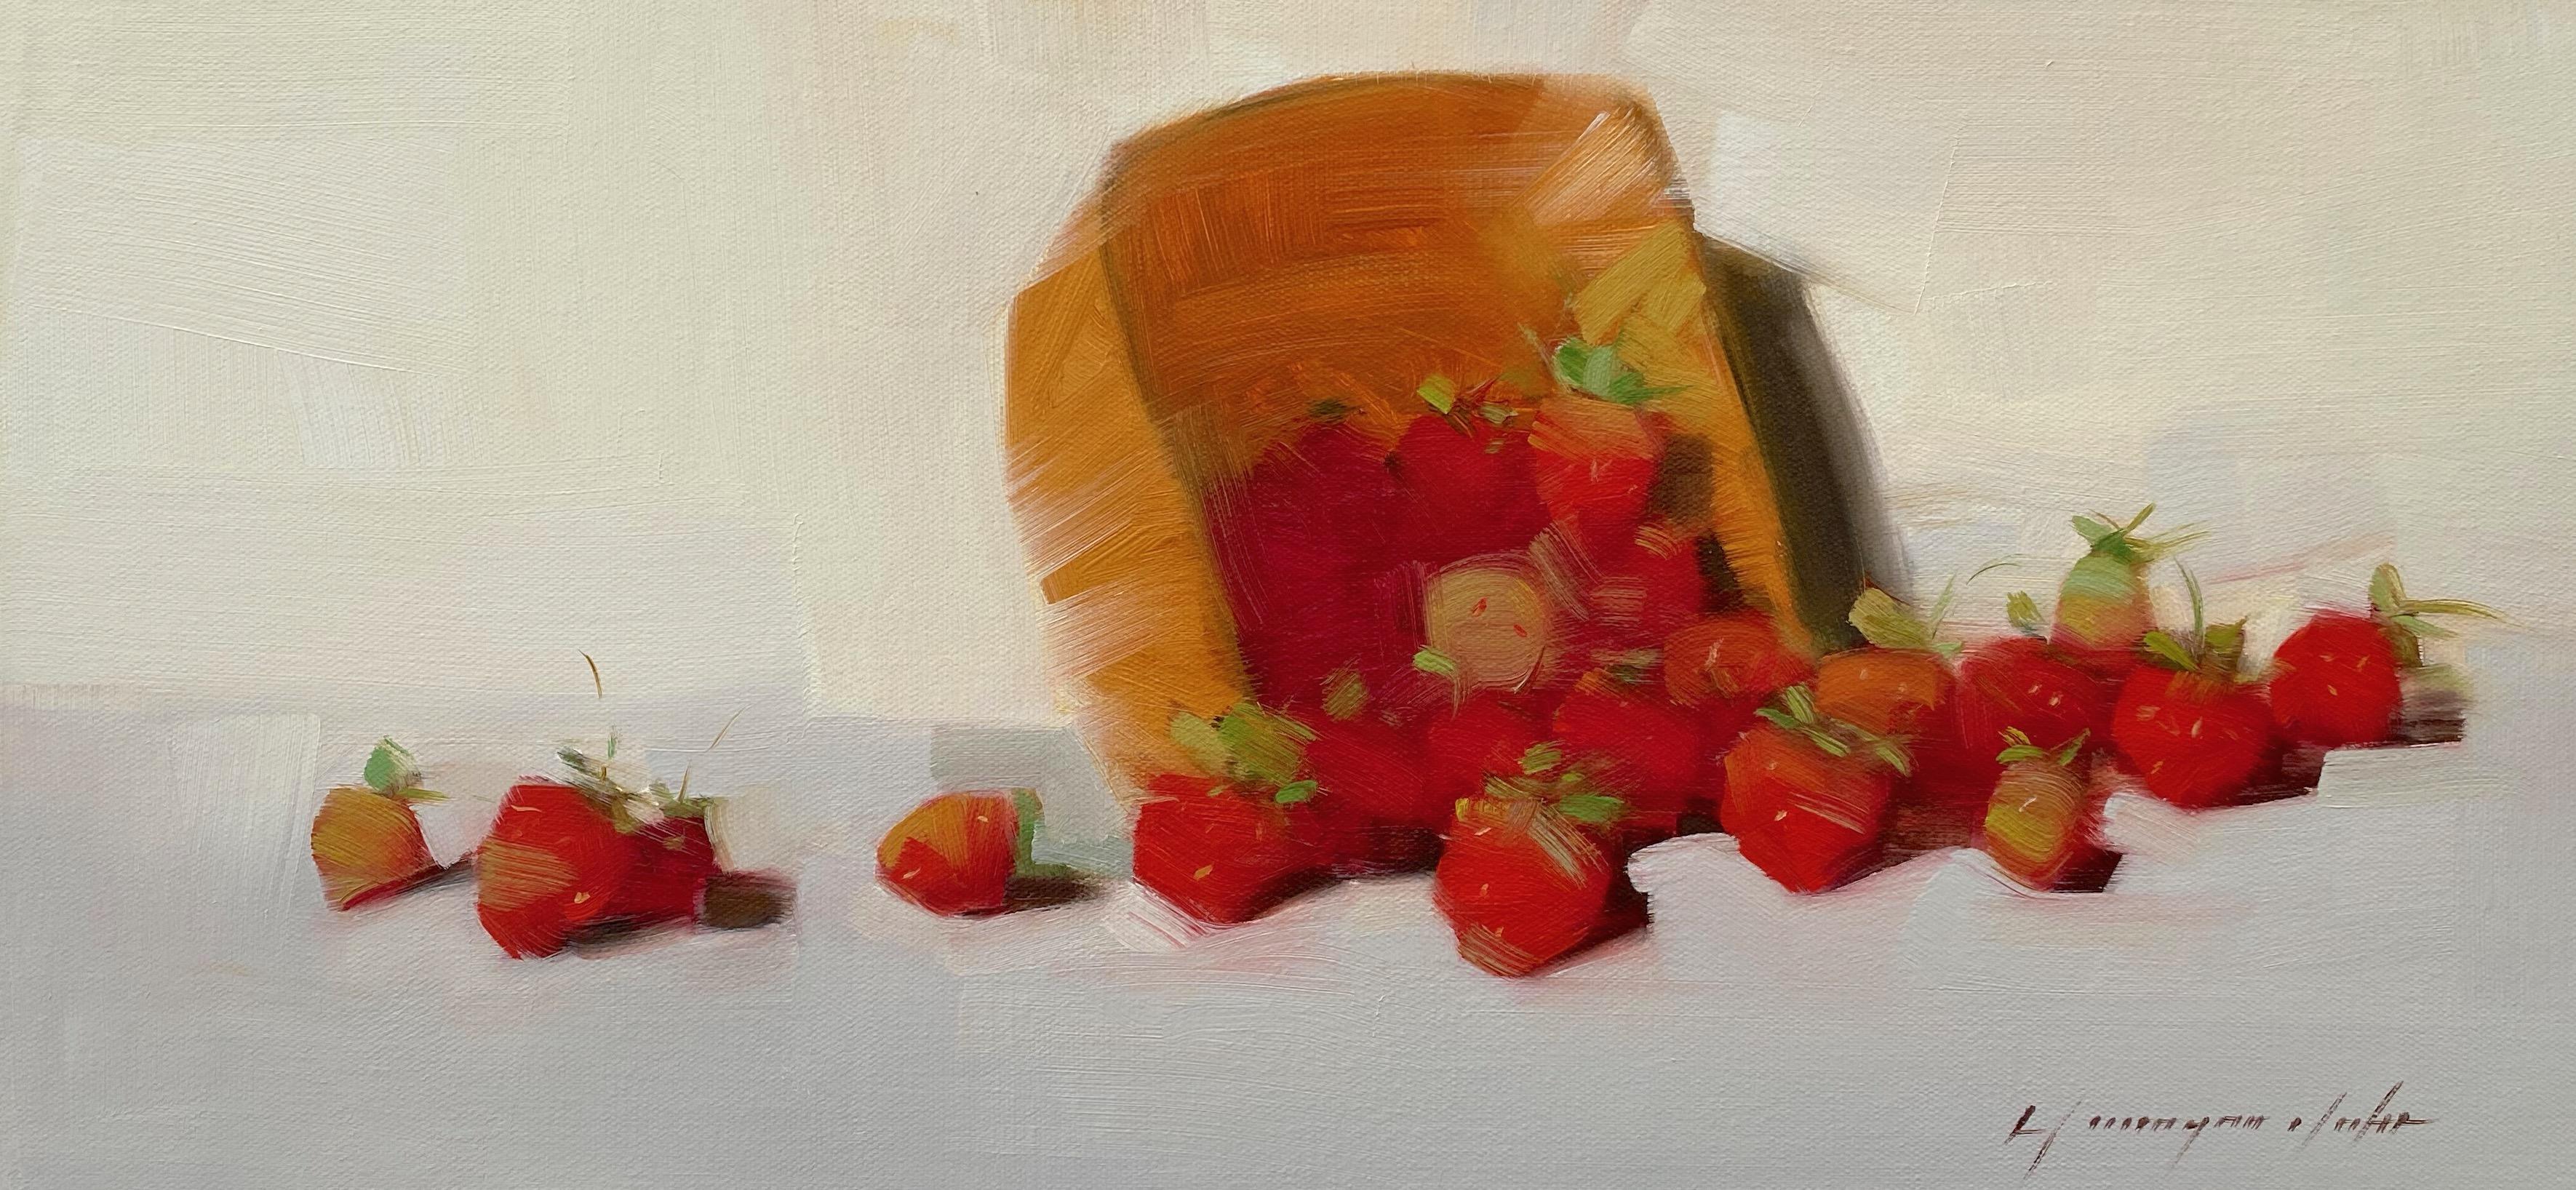 Vahe Yeremyan Landscape Painting - Strawberries, Still life, kitchen art, Original oil Painting, Ready to Hang